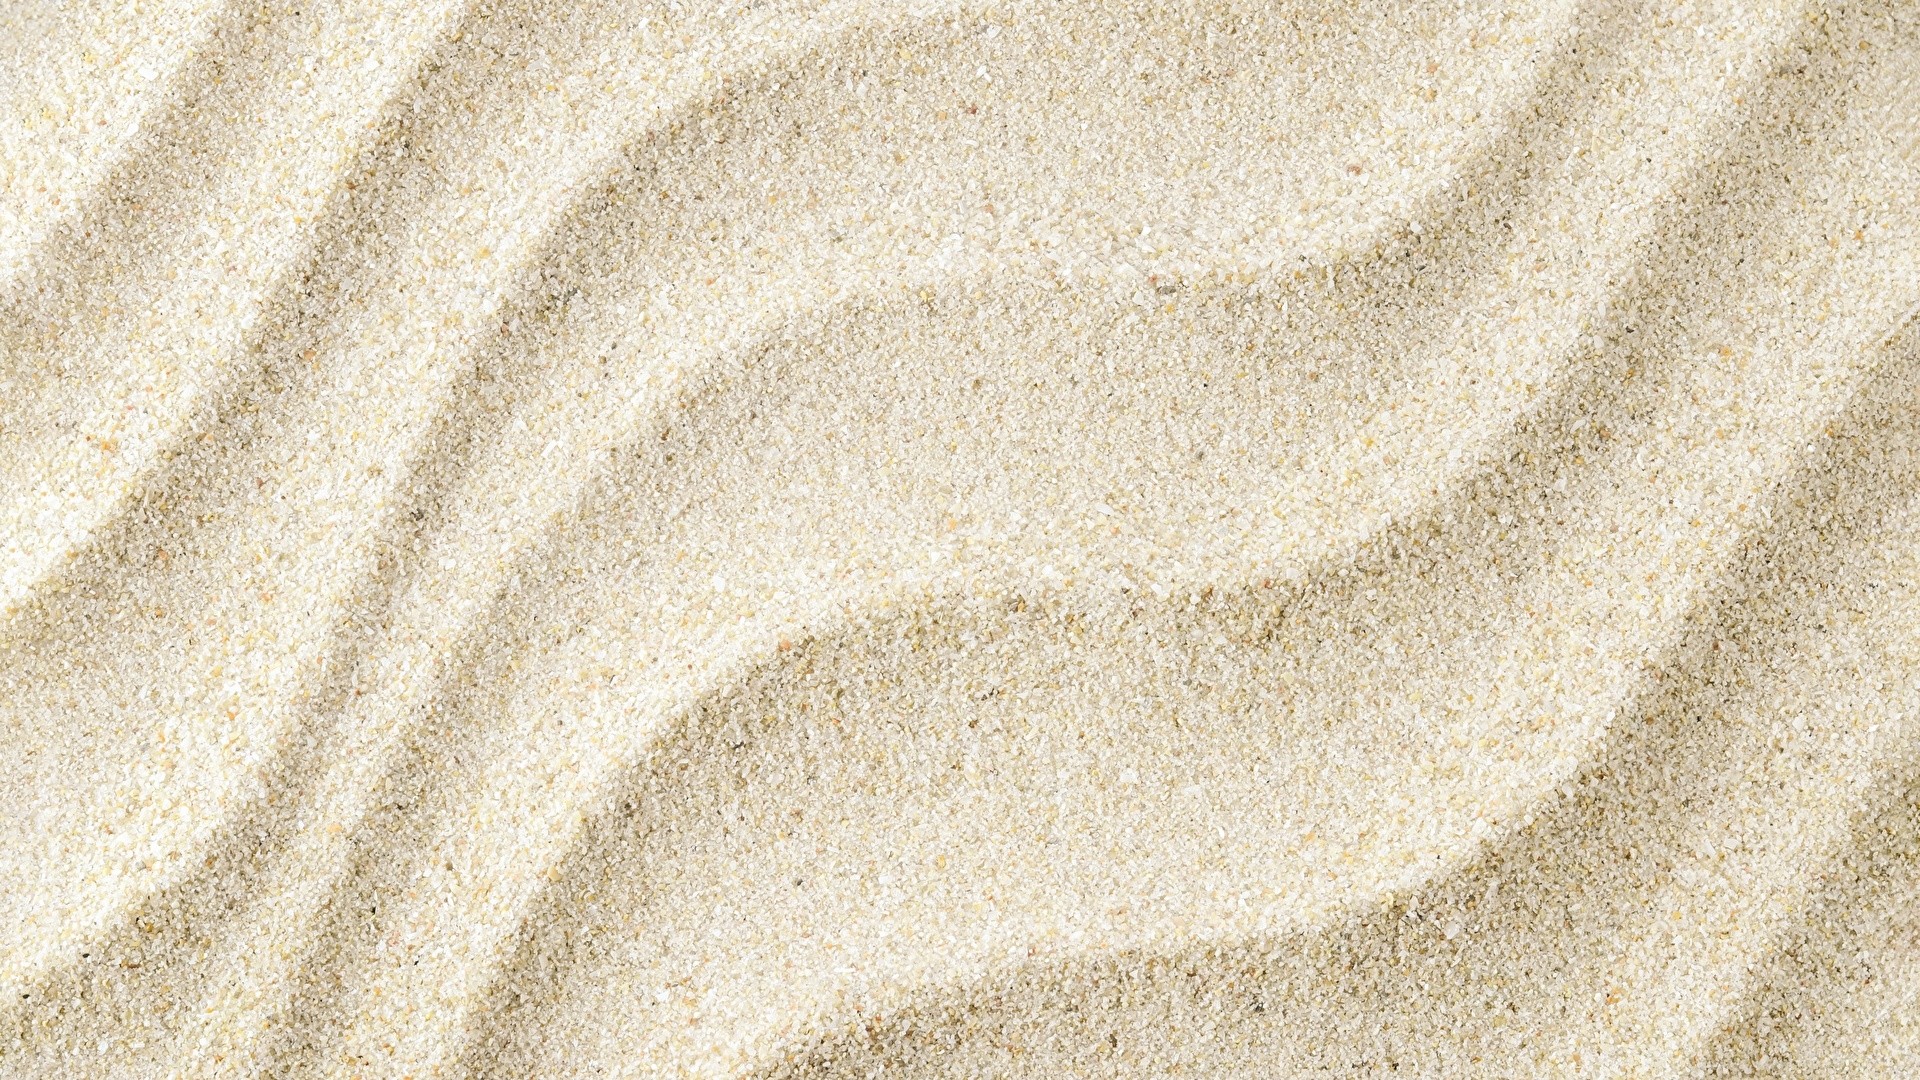 Texture Sand wallpaper for computer